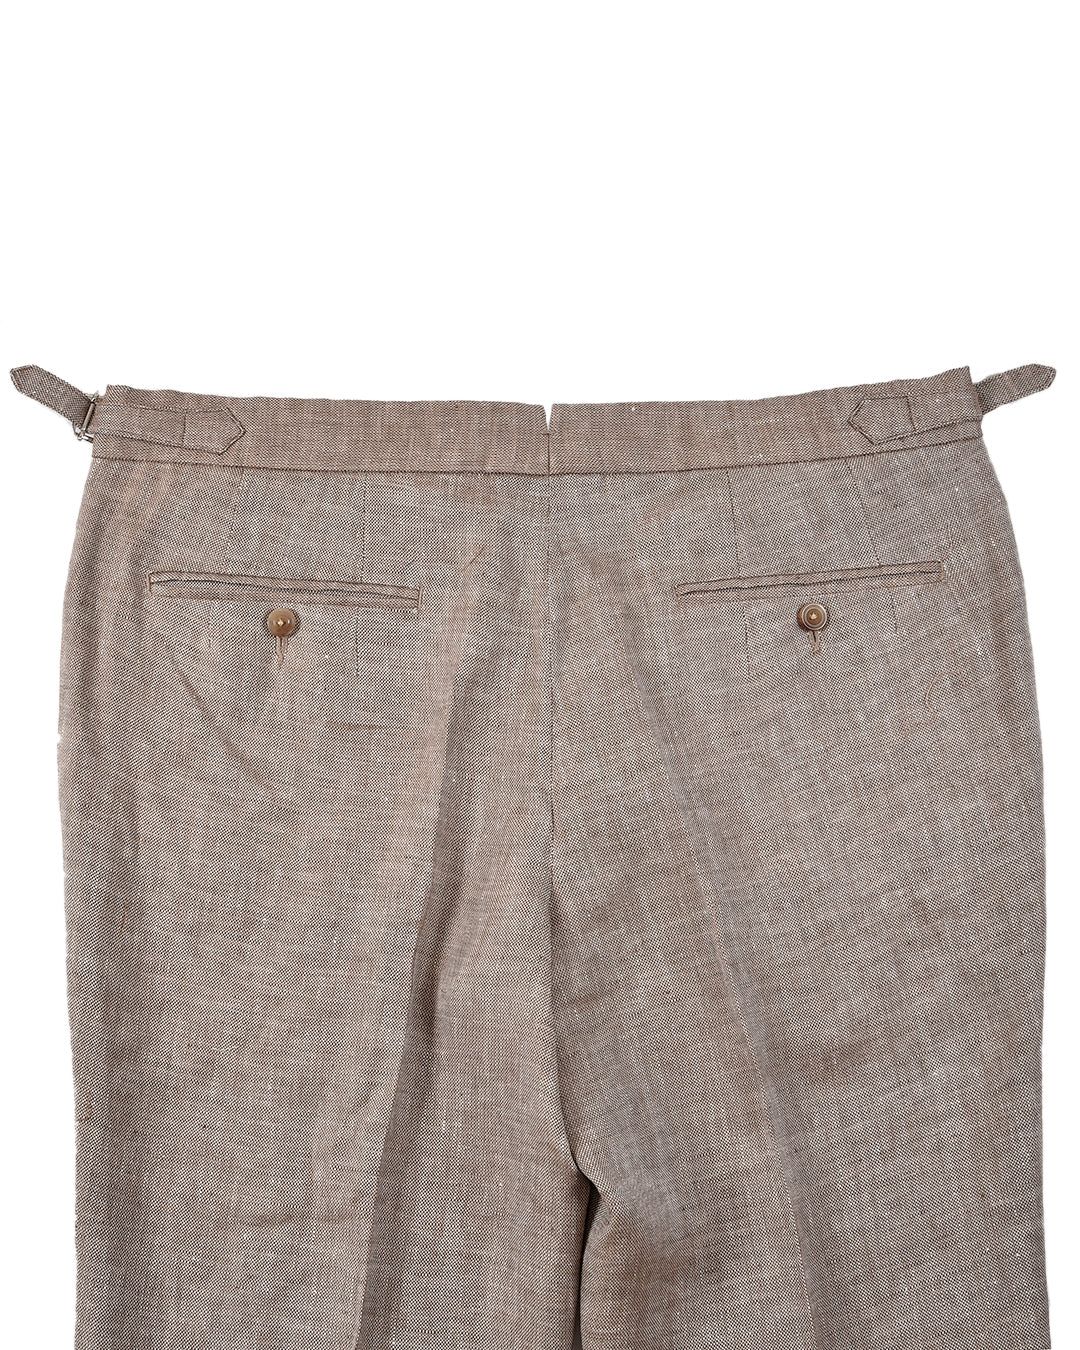 Back view of custom linen pants for men by Luxire in brown cream